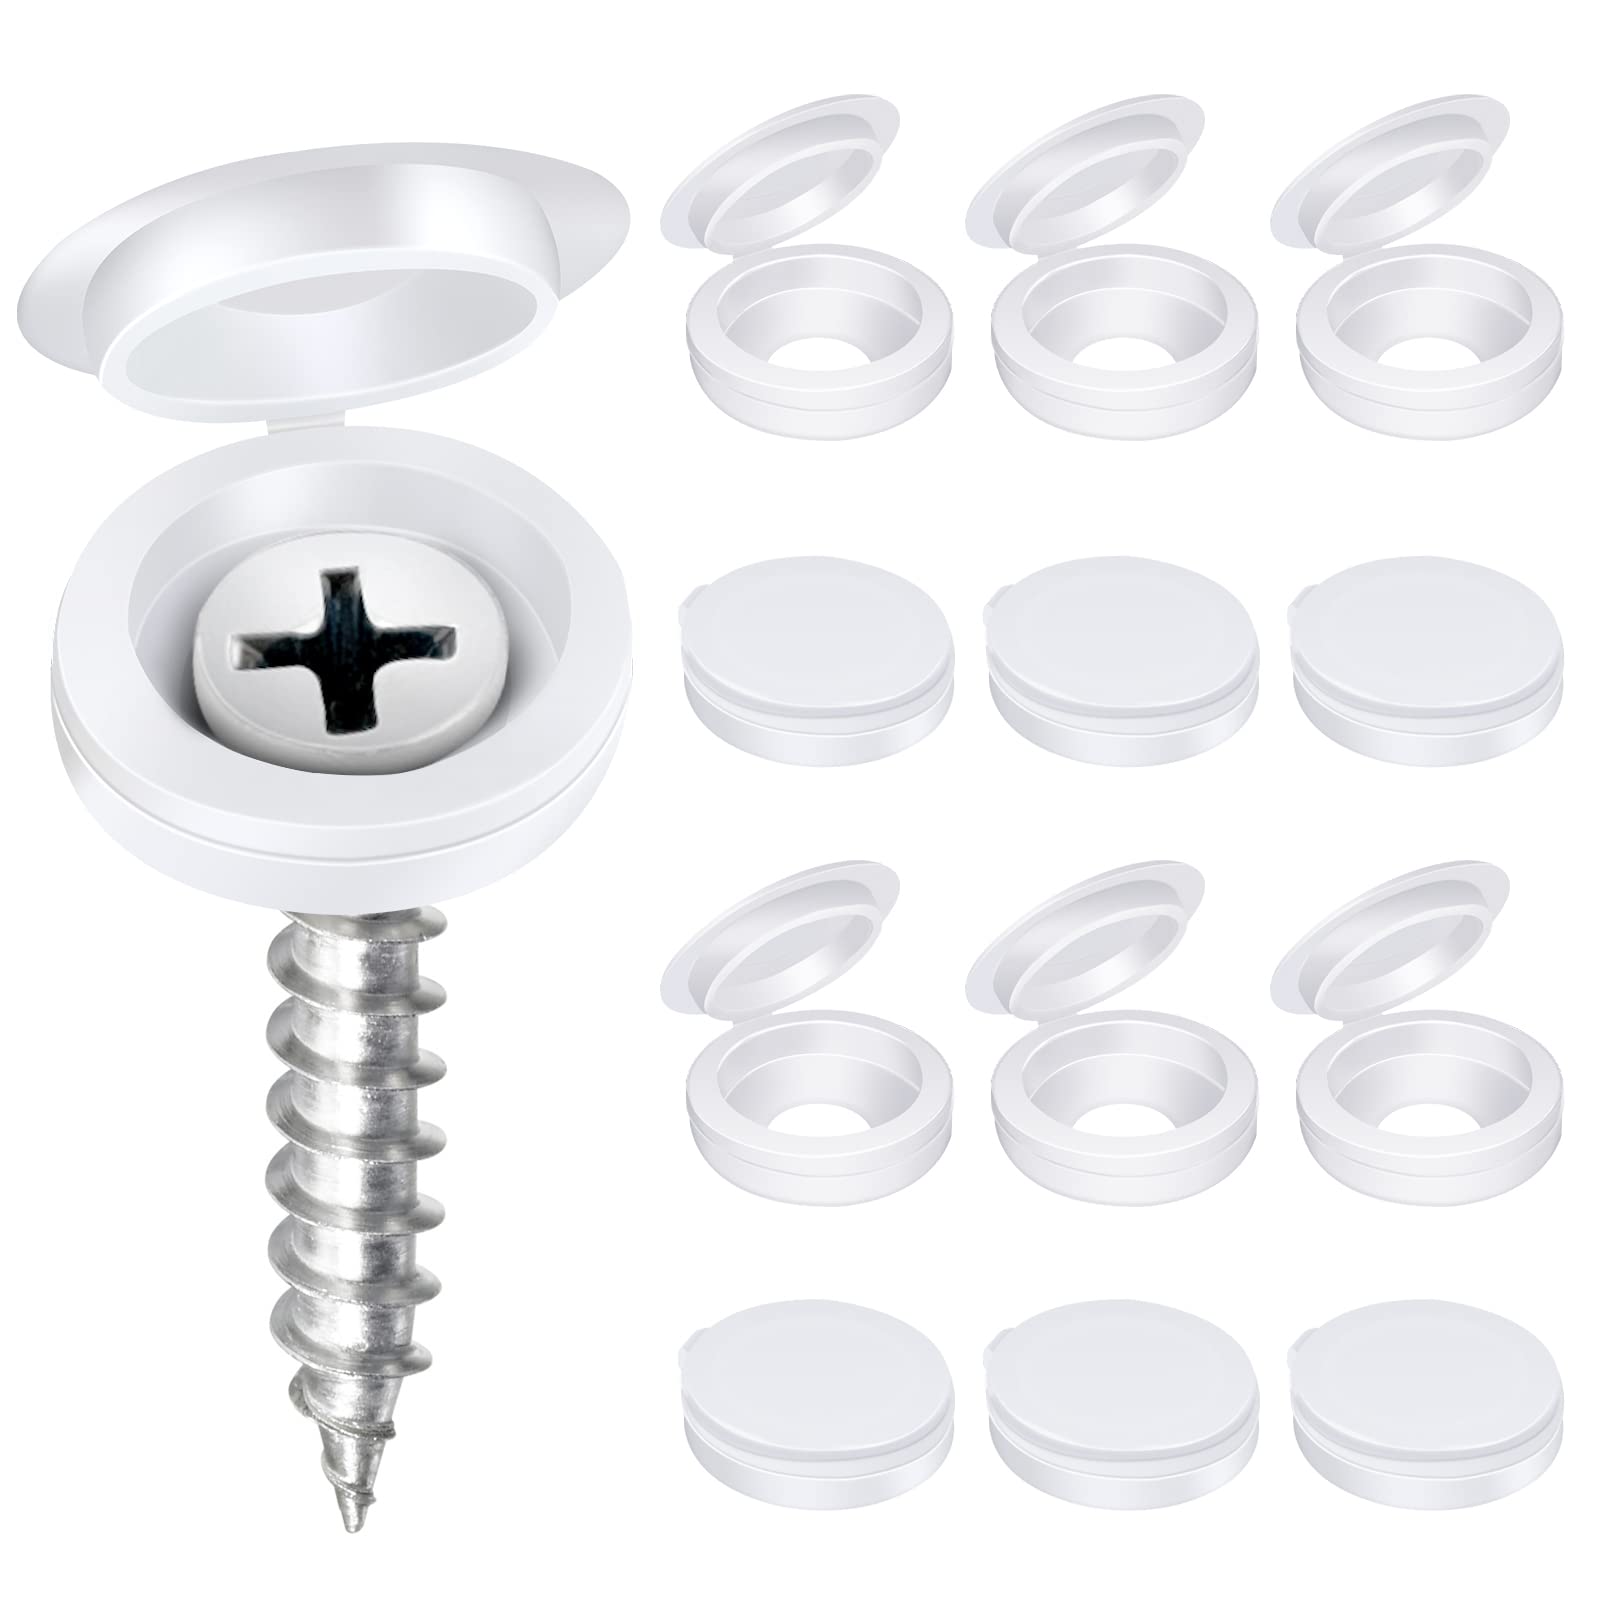 200pcs Screw Caps, Sopito Plastic Hinged Screw Cover Caps Fold Screw Snap Covers Washer Flip Tops for Covering Screw Heads, Screw Protection (White)